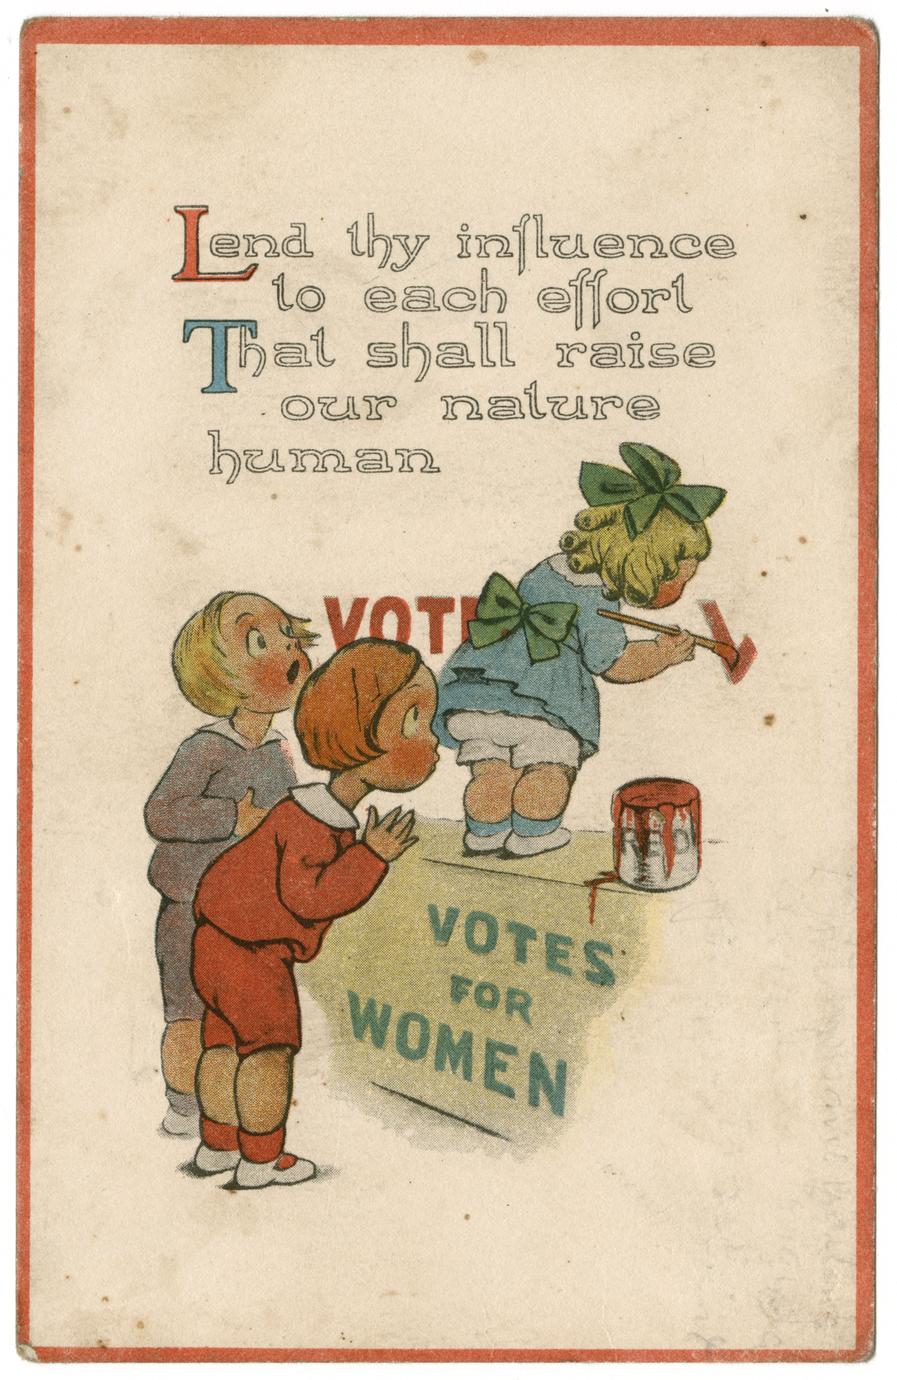 Lend thy influence, suffrage postcard (1 of 2)